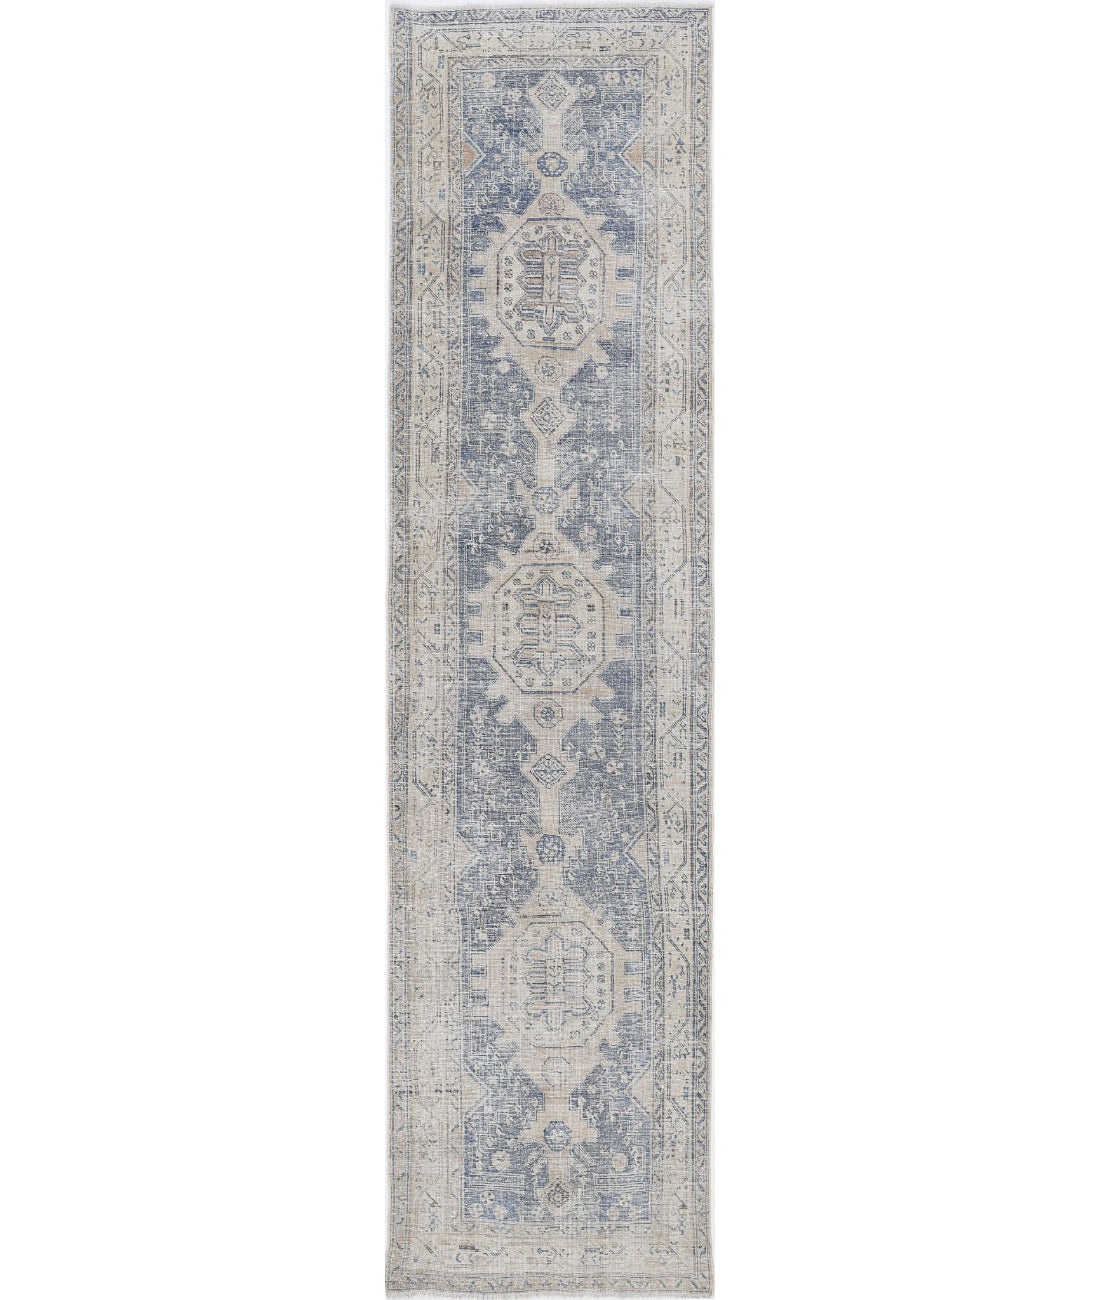 Hand Knotted Vintage Persian Hamadan Wool Rug - 3&#39;5&#39;&#39; x 13&#39;5&#39;&#39; 3&#39;5&#39;&#39; x 13&#39;5&#39;&#39; (103 X 403) / Blue / Ivory